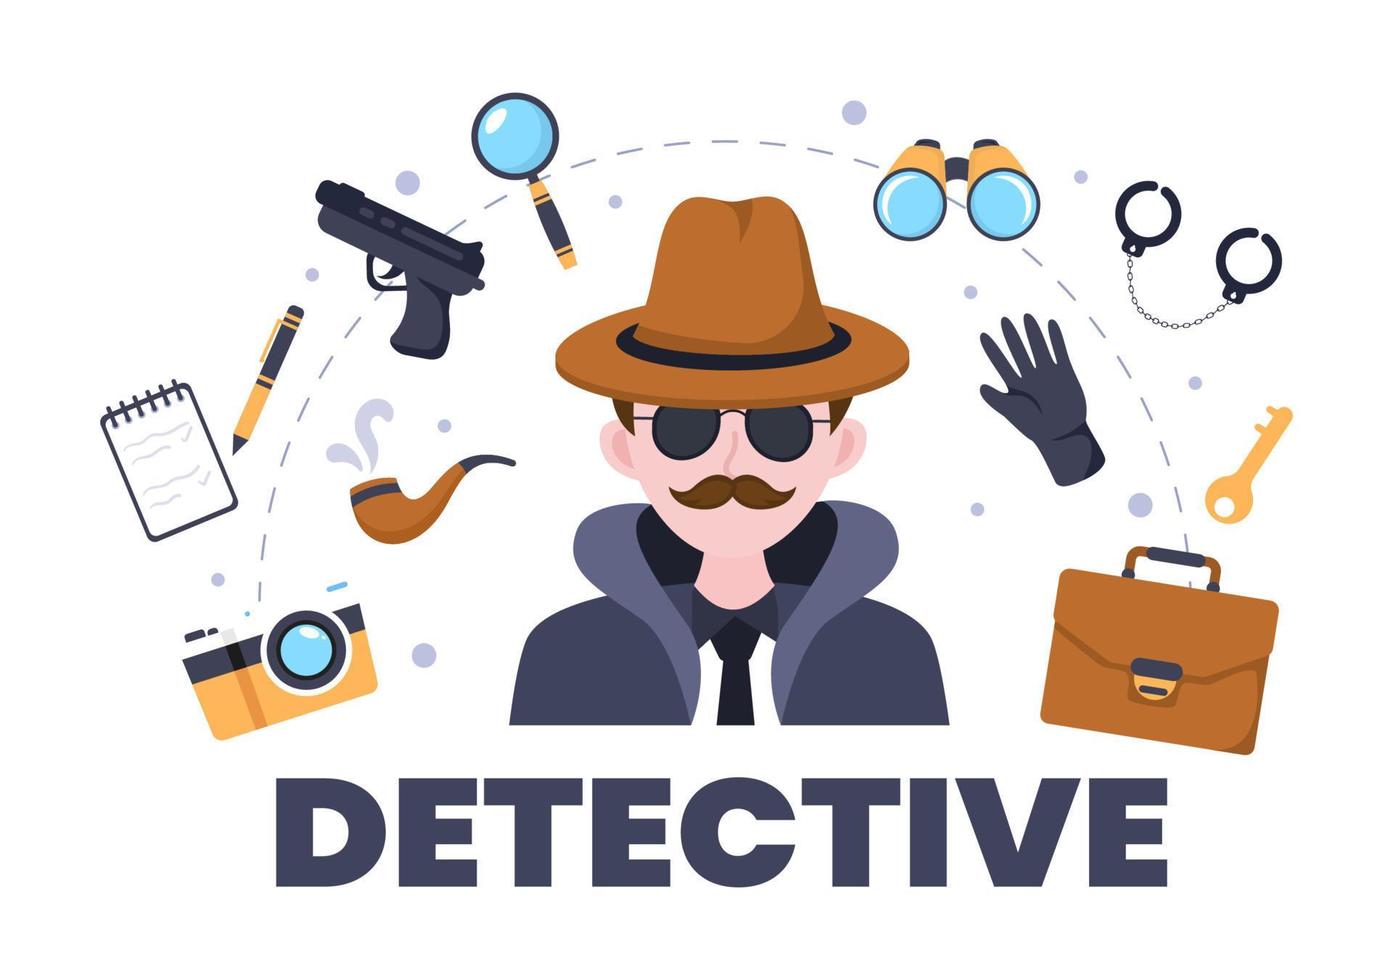 Private Investigator or Detective Who Collects Information to Solve Crimes with Equipment such as Magnifying Glass, Handcuffs and Other in Cartoon Background Illustration vector